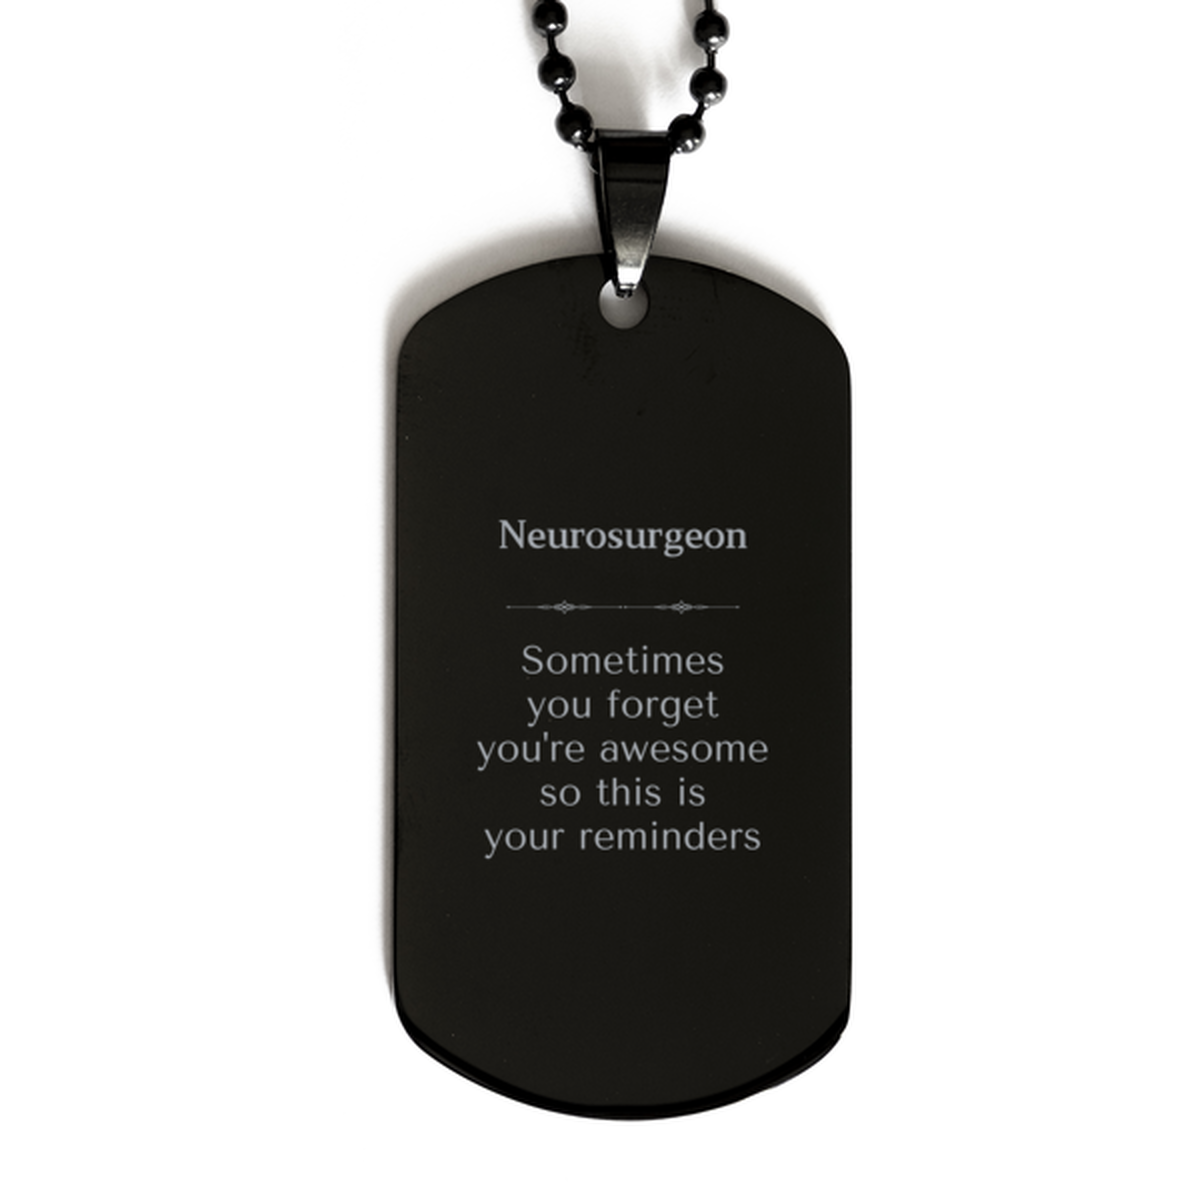 Sentimental Neurosurgeon Black Dog Tag, Neurosurgeon Sometimes you forget you're awesome so this is your reminders, Graduation Christmas Birthday Gifts for Neurosurgeon, Men, Women, Coworkers